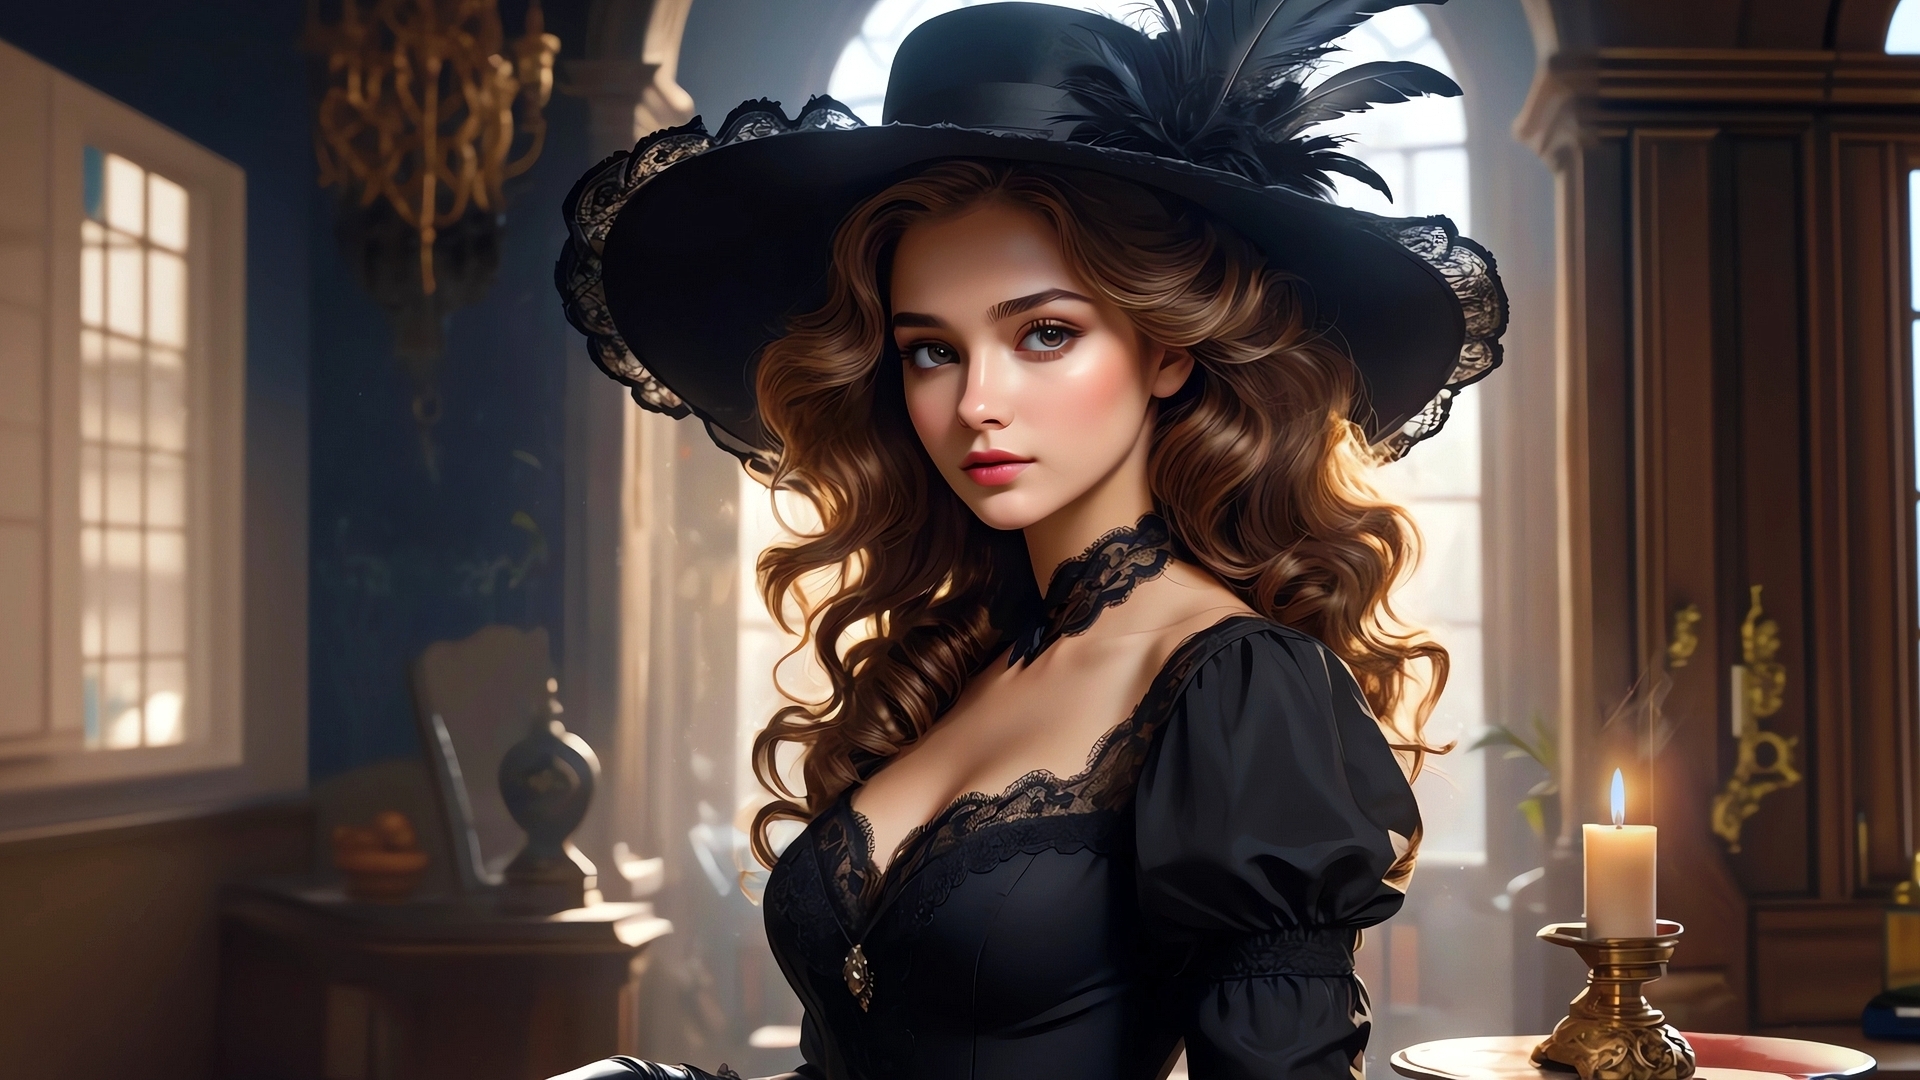 Portrait of a girl in a black dress and hat